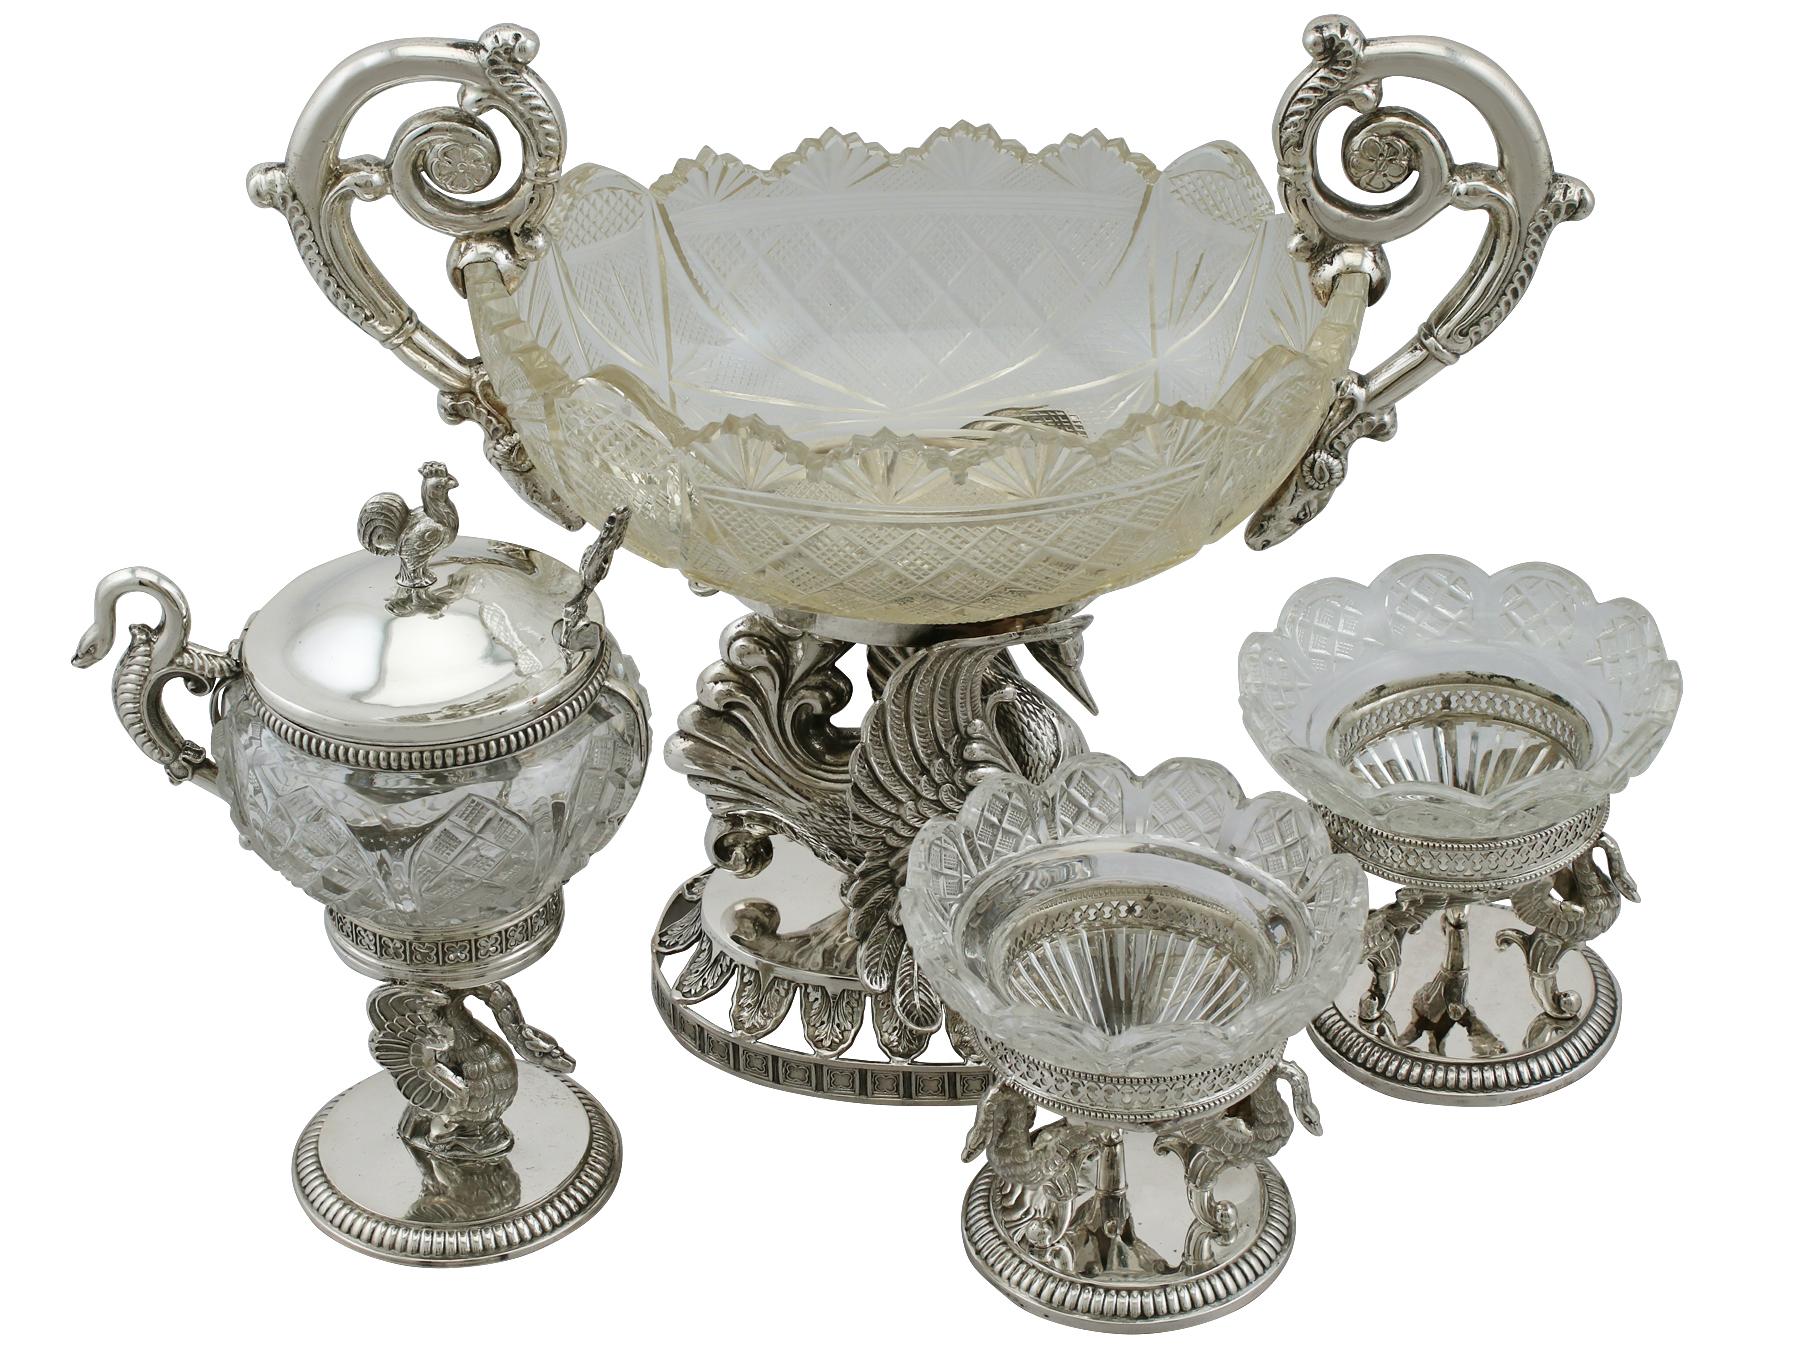 This exceptional antique German silver and glass table / cruet set consists of a bon bon dish, pair of salts and a mustard pot.

The impressive bon bon dish has an oval shaped form, incorporating the original cut glass vessel.

Either side of the